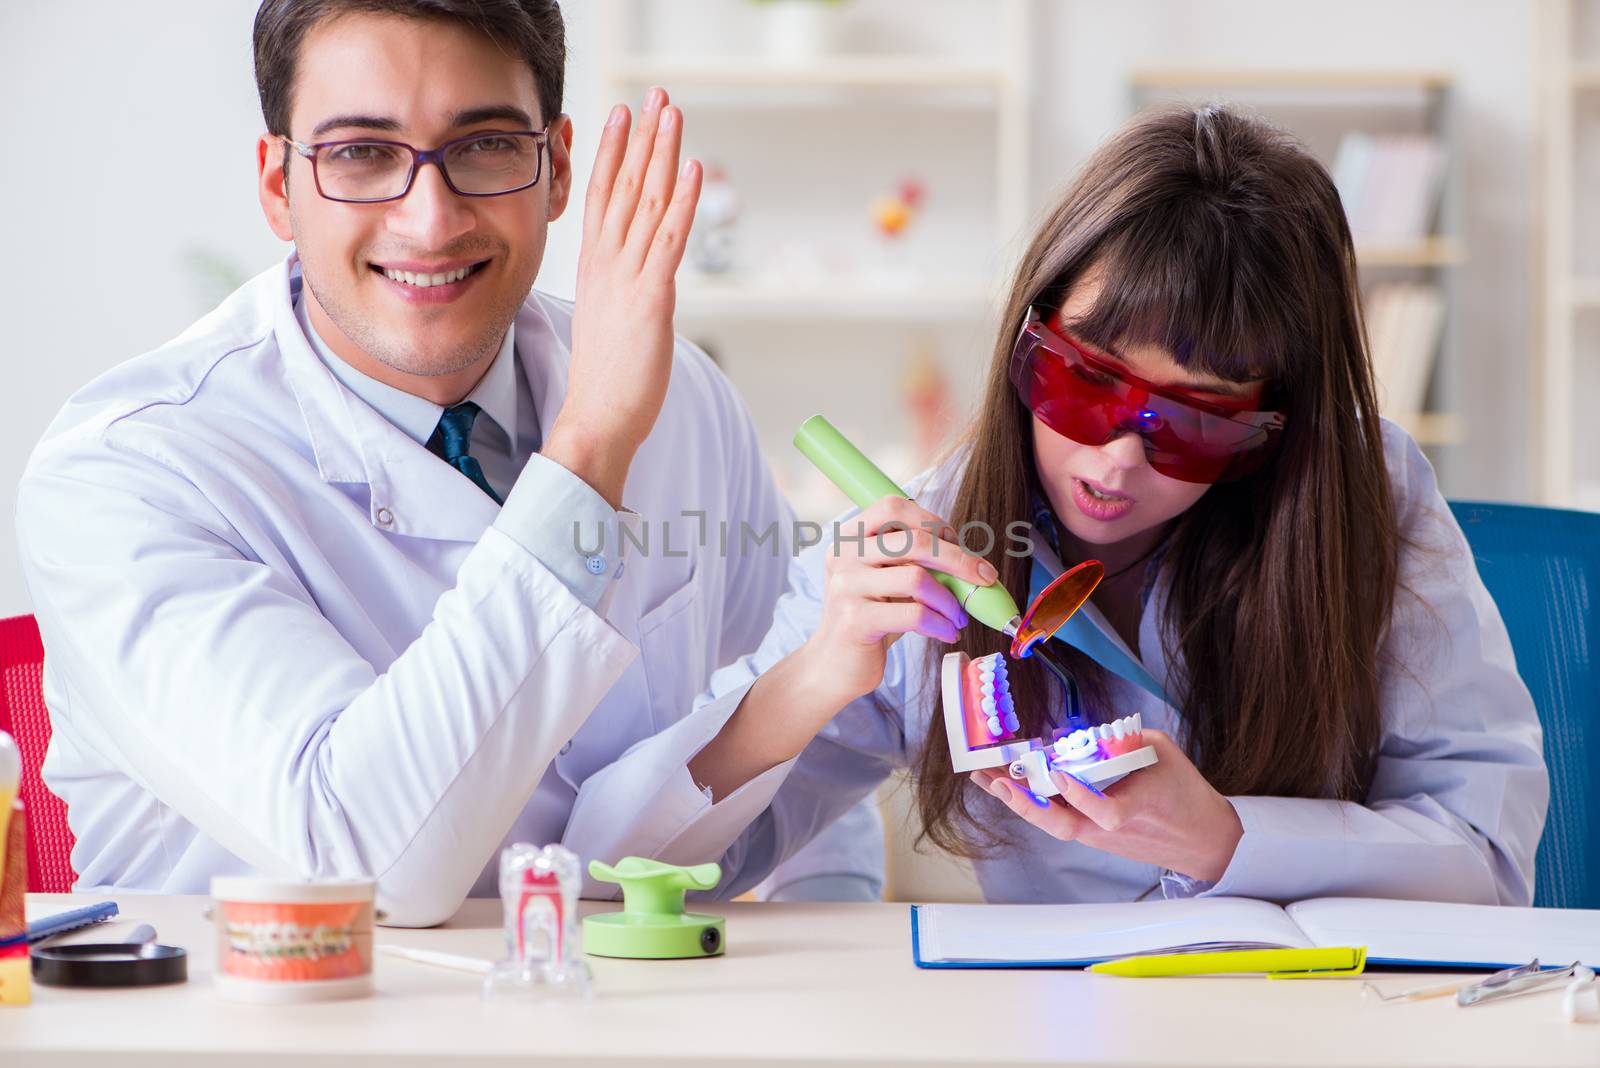 Doctor explaining to assistant how to use ultraviolet gun by Elnur